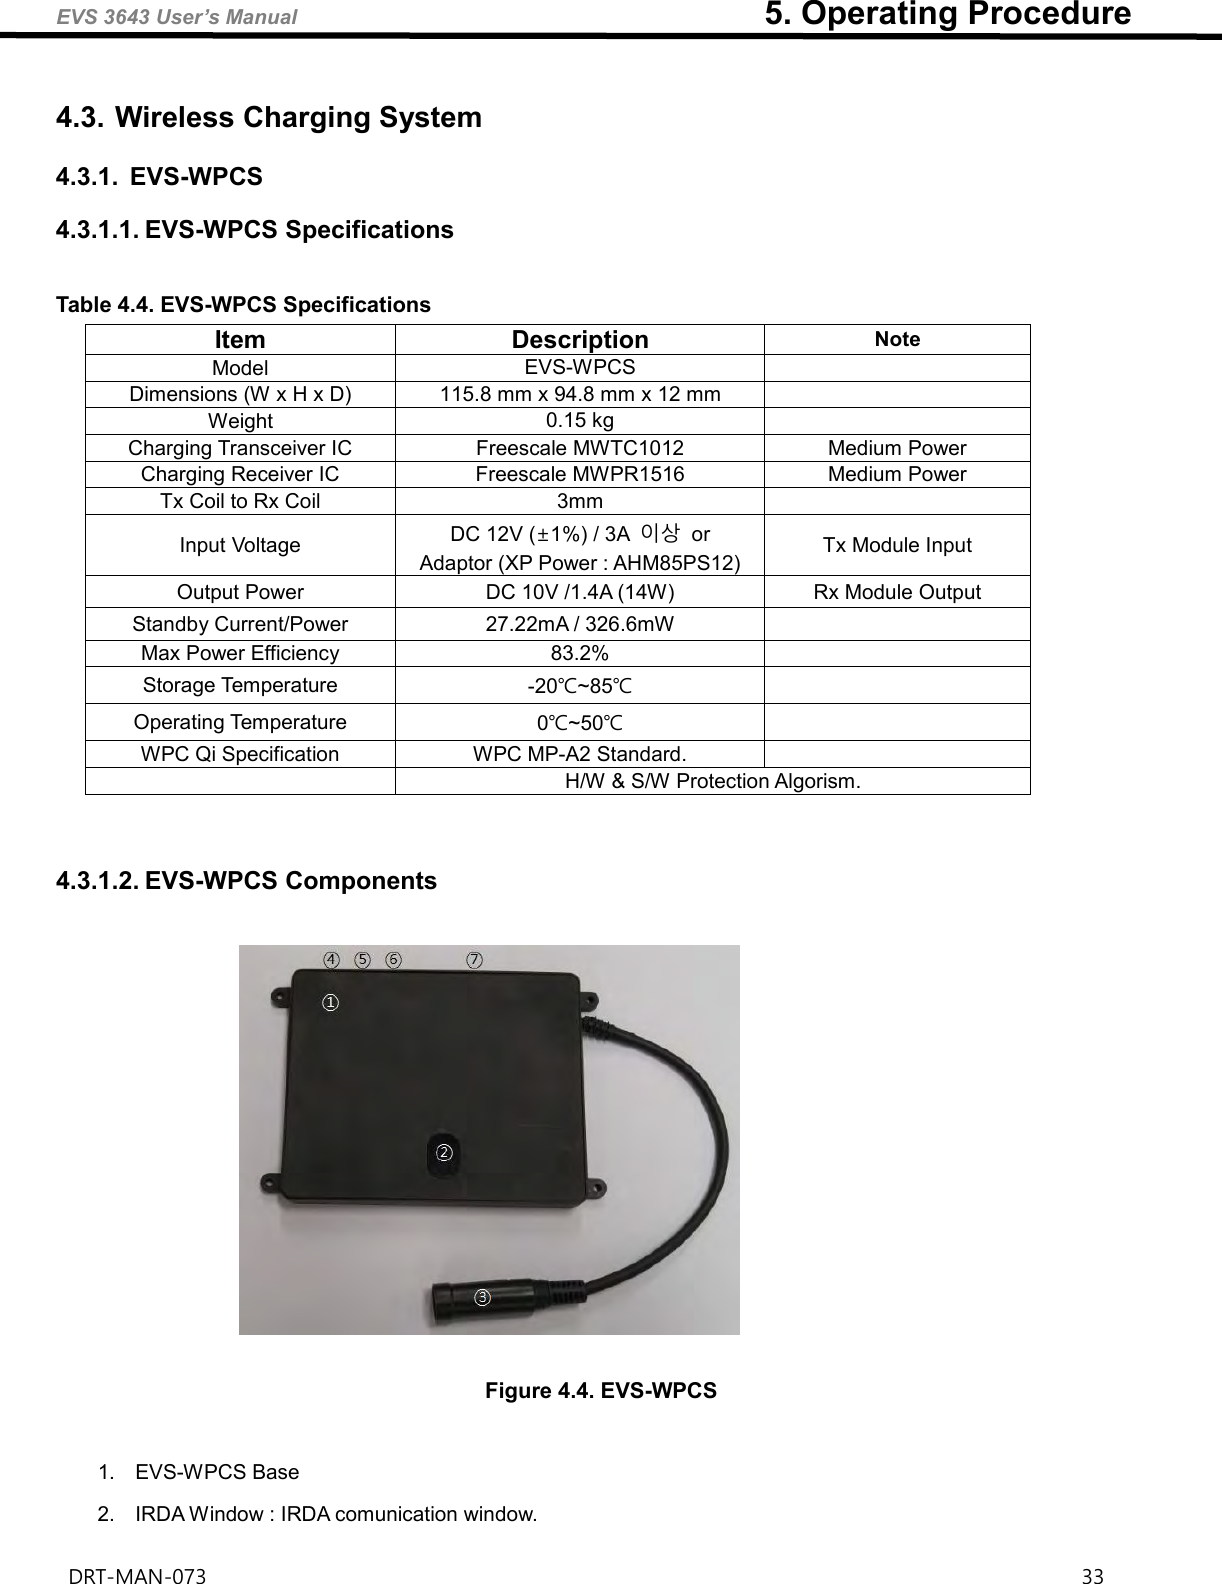 EVS 3643 User’s Manual                                                        5. Operating Procedure DRT-MAN-073                                                                                                                                                                33    4.3. Wireless Charging System 4.3.1.  EVS-WPCS 4.3.1.1. EVS-WPCS Specifications  Table 4.4. EVS-WPCS Specifications Item Description Note Model EVS-WPCS  Dimensions (W x H x D) 115.8 mm x 94.8 mm x 12 mm  Weight 0.15 kg  Charging Transceiver IC Freescale MWTC1012 Medium Power Charging Receiver IC Freescale MWPR1516 Medium Power Tx Coil to Rx Coil 3mm  Input Voltage DC 12V (±1%) / 3A  이상 or Adaptor (XP Power : AHM85PS12) Tx Module Input Output Power DC 10V /1.4A (14W) Rx Module Output Standby Current/Power 27.22mA / 326.6mW  Max Power Efficiency 83.2%  Storage Temperature -20℃~85℃  Operating Temperature 0℃~50℃  WPC Qi Specification WPC MP-A2 Standard.   H/W &amp; S/W Protection Algorism.    4.3.1.2. EVS-WPCS Components   Figure 4.4. EVS-WPCS  1.  EVS-WPCS Base   2.  IRDA Window : IRDA comunication window. 